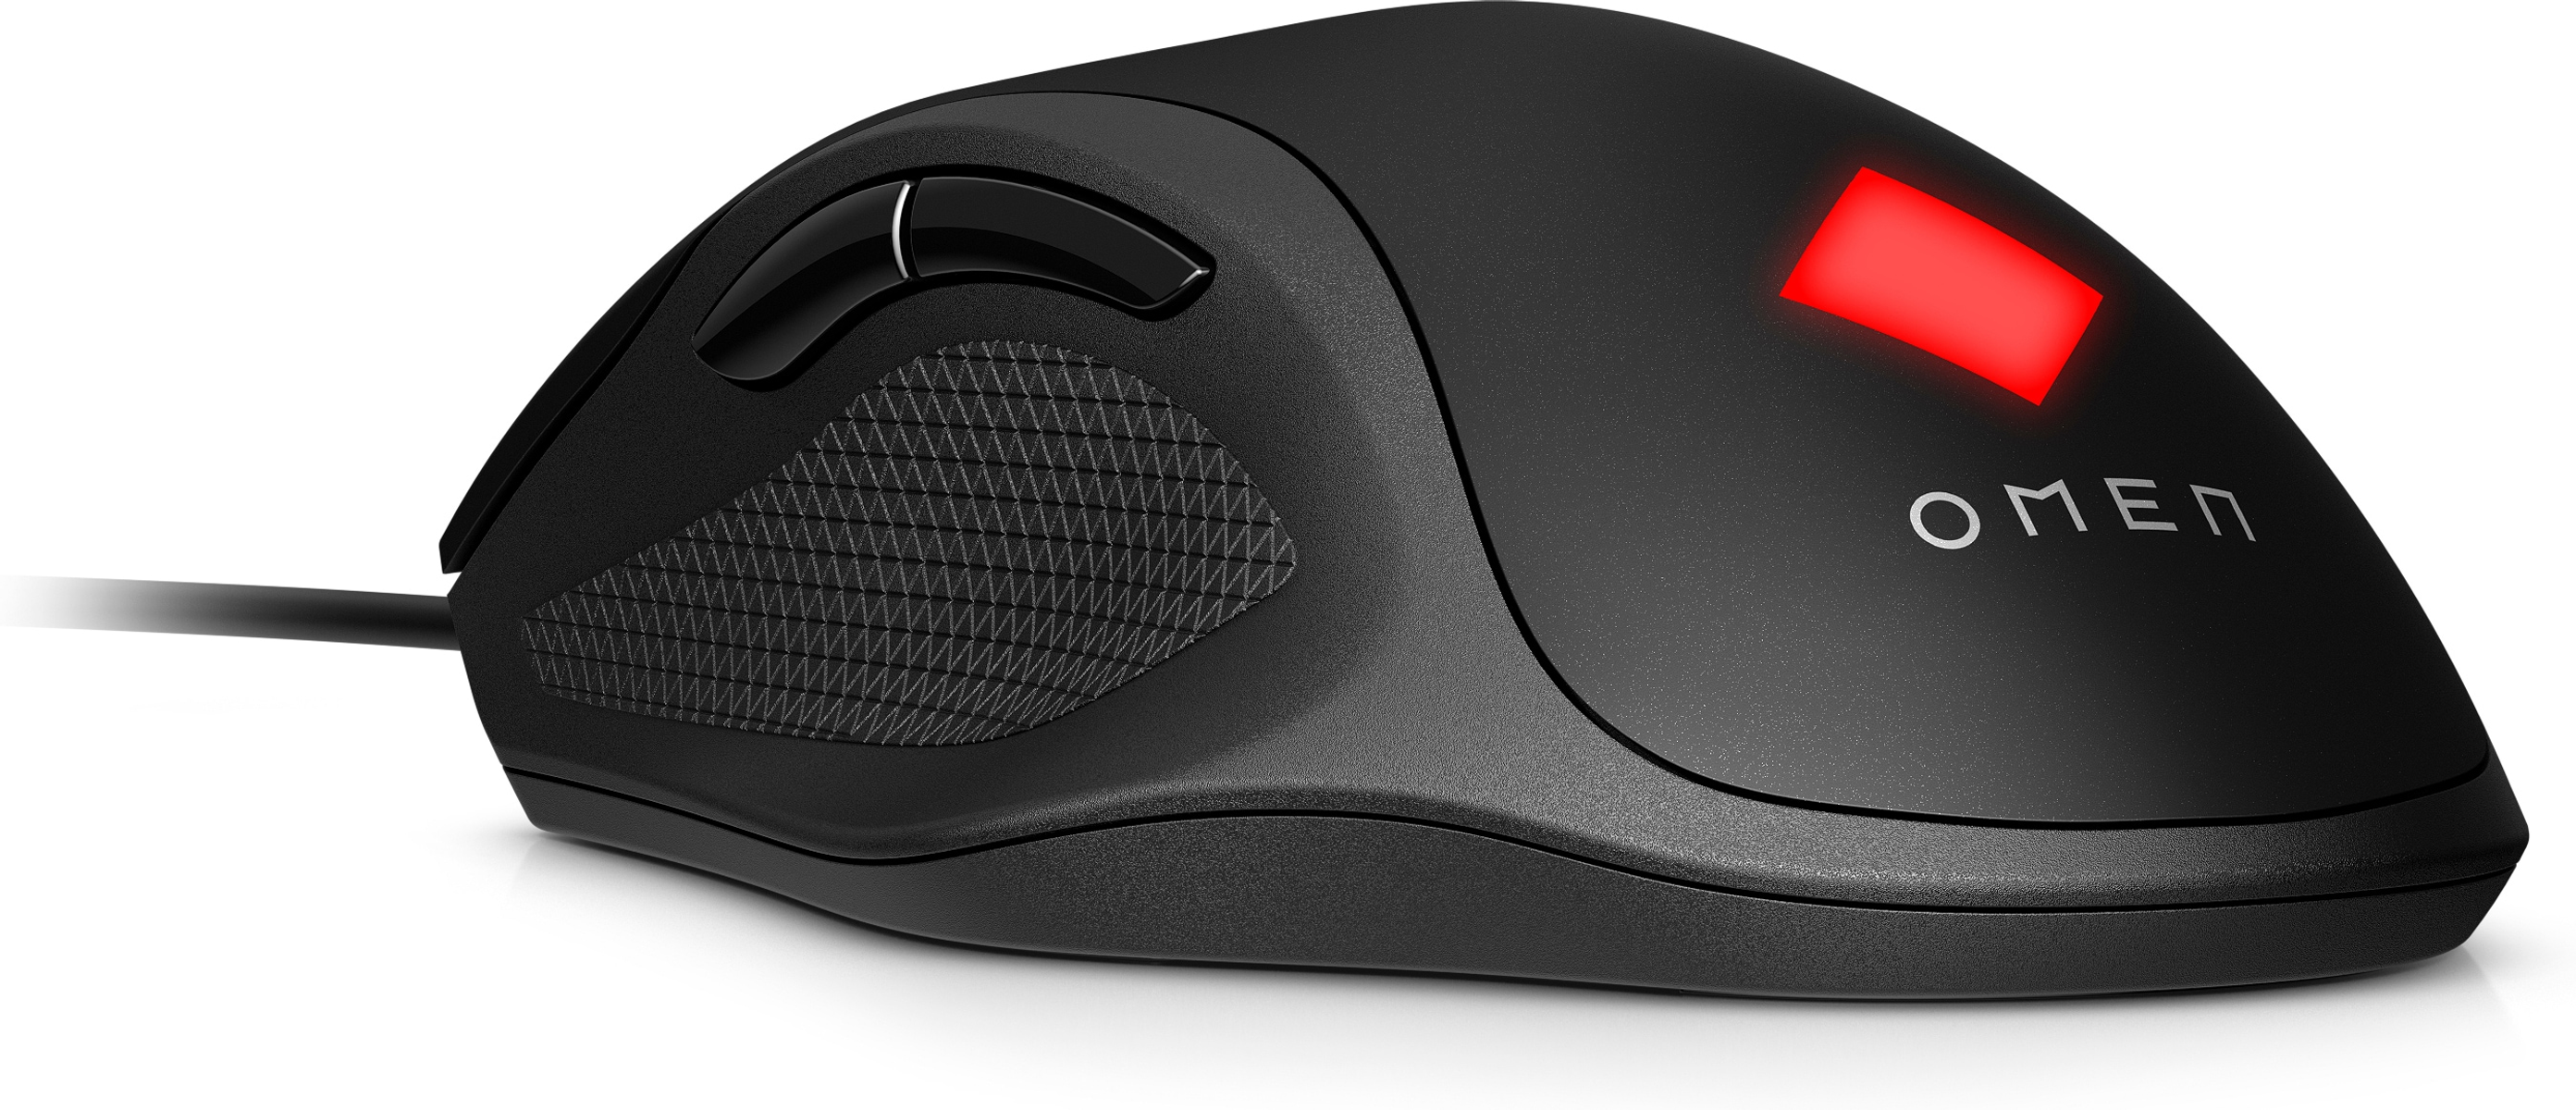 GAMING MOUSE Gaming-Maus, OMEN ESSENTIAL Schwarz 8BC52AA VECTOR HP